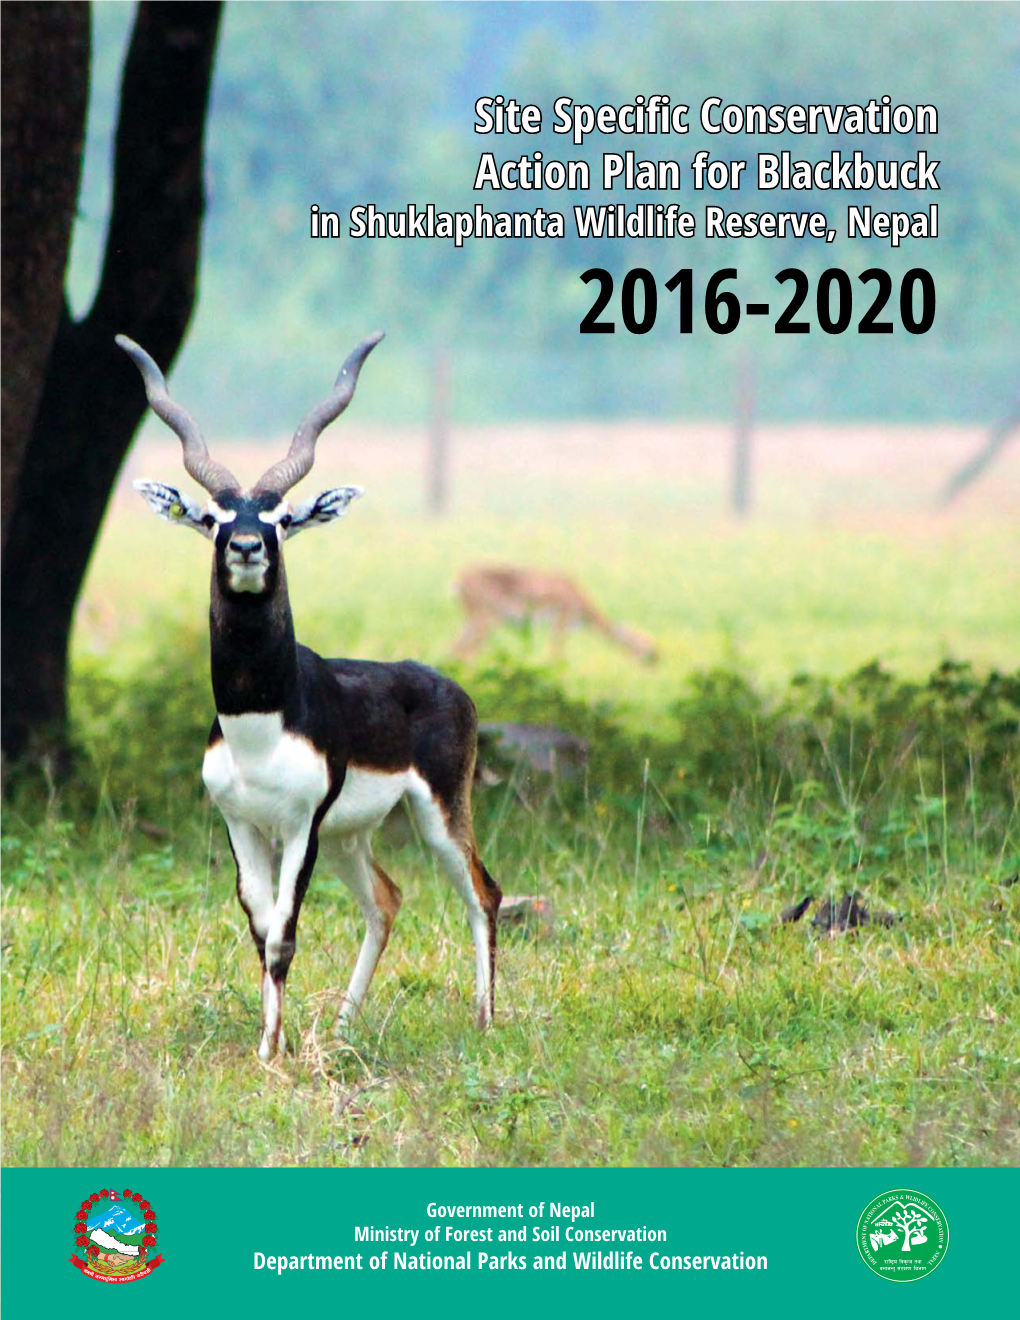 Site-Specific Conservation Action Plan for Blackbuck in Shuklaphanta